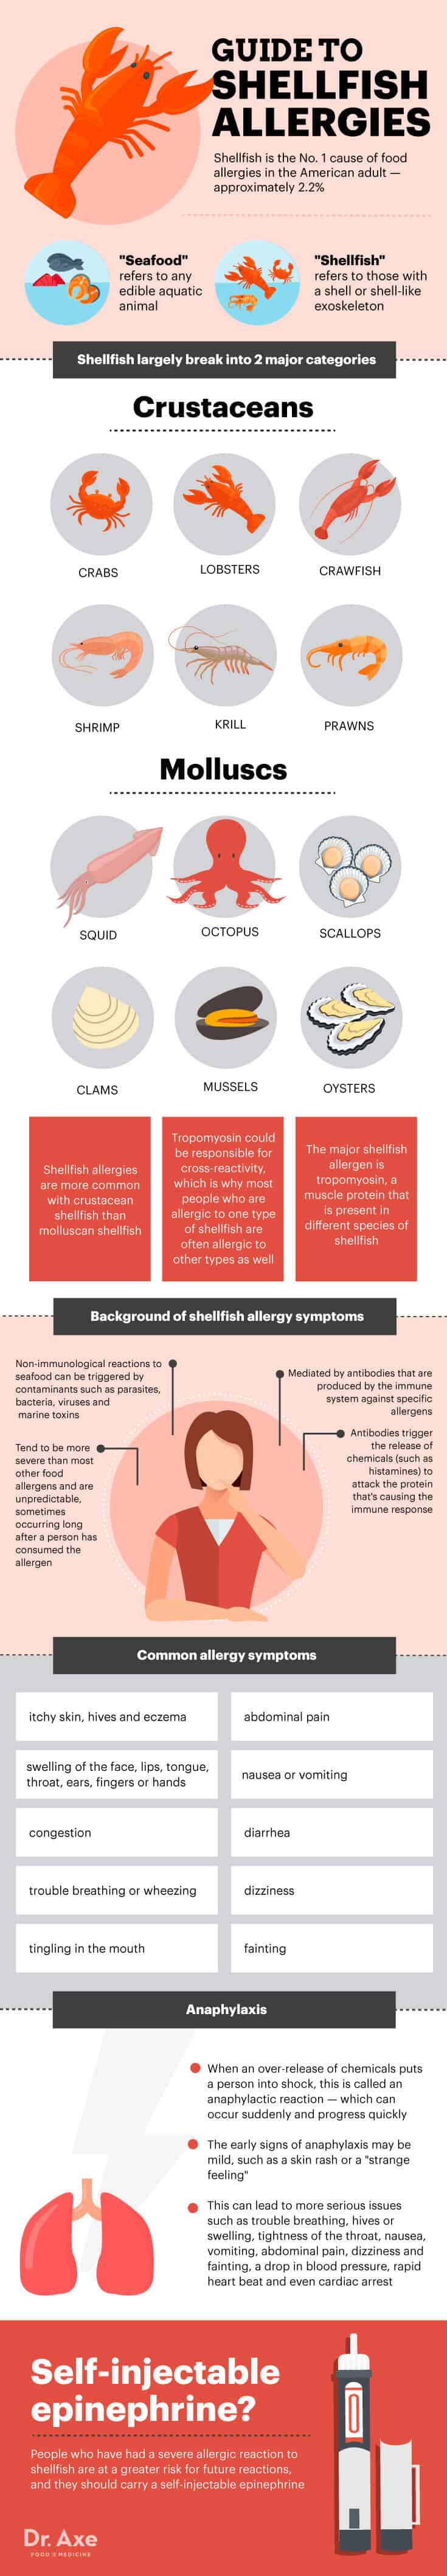 Guide to shellfish allergy